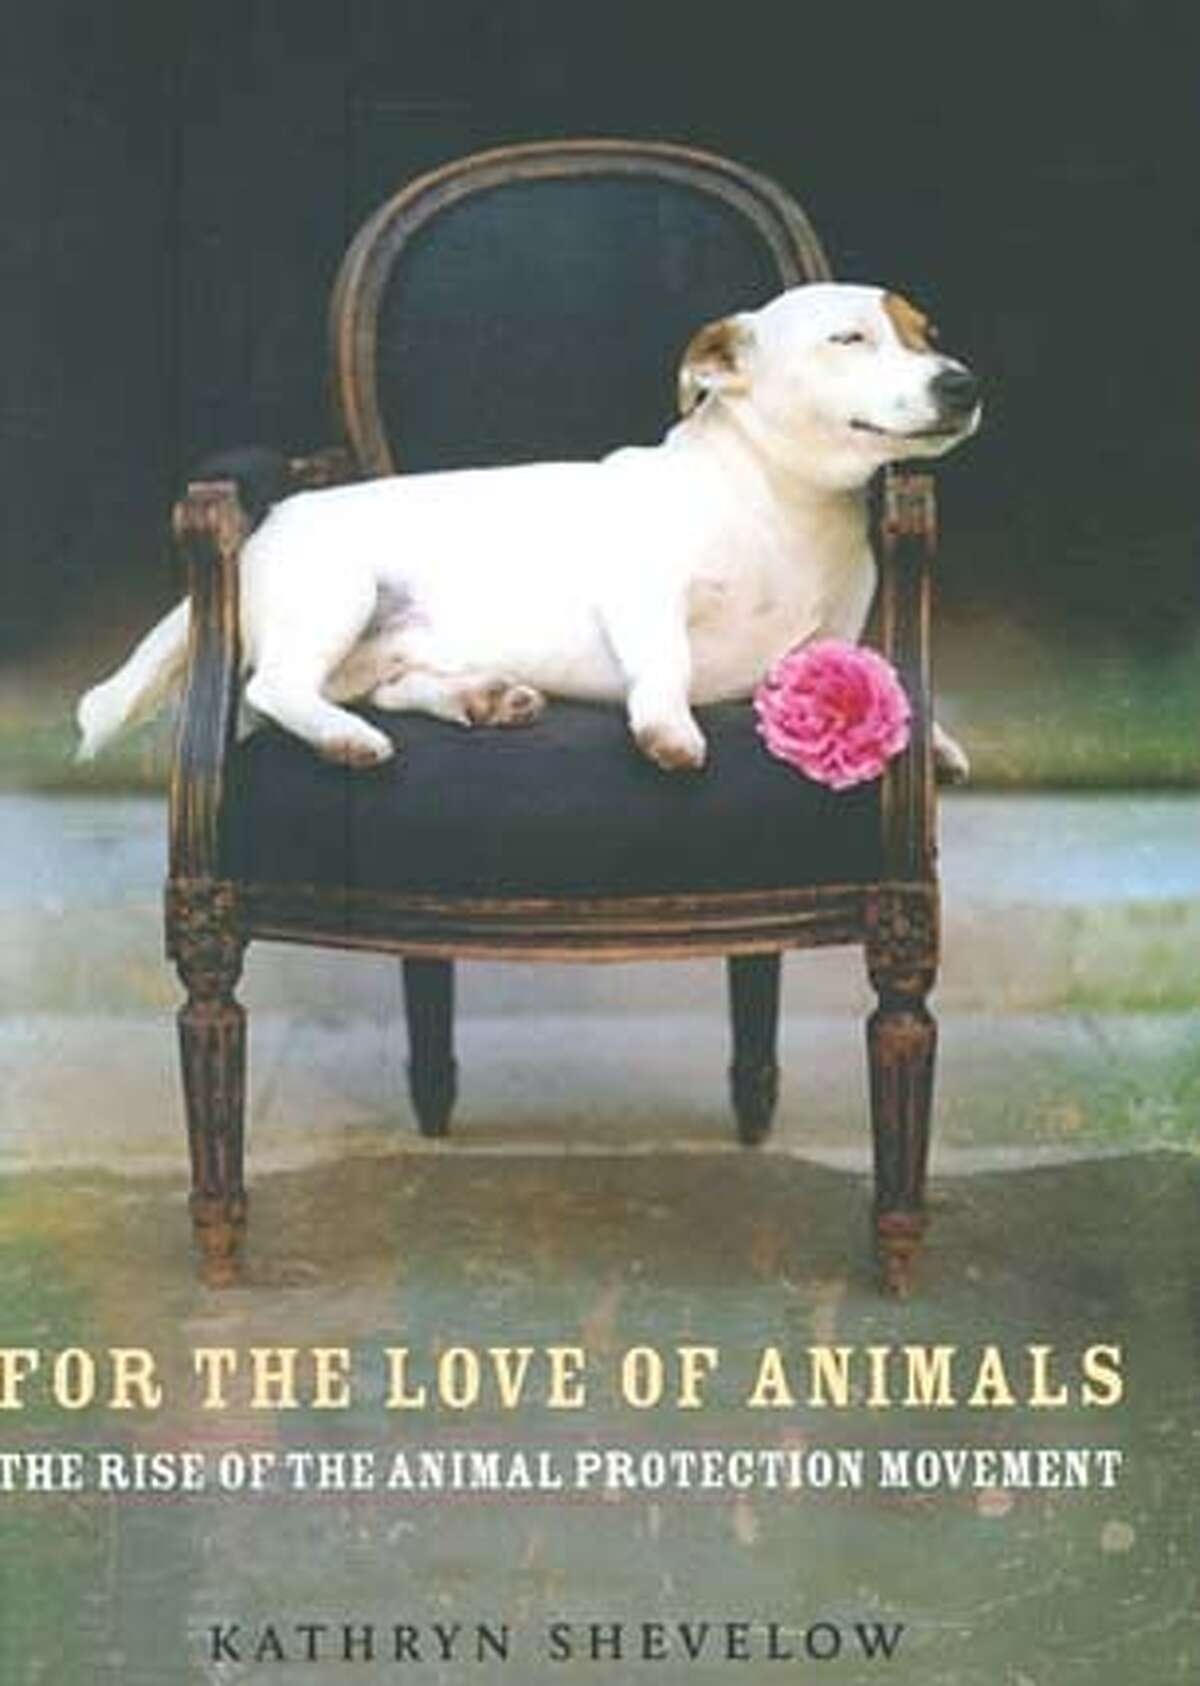 "For the Love of Animals: The Rise of the Animal Protection Movement" by Kathryn Shevelow